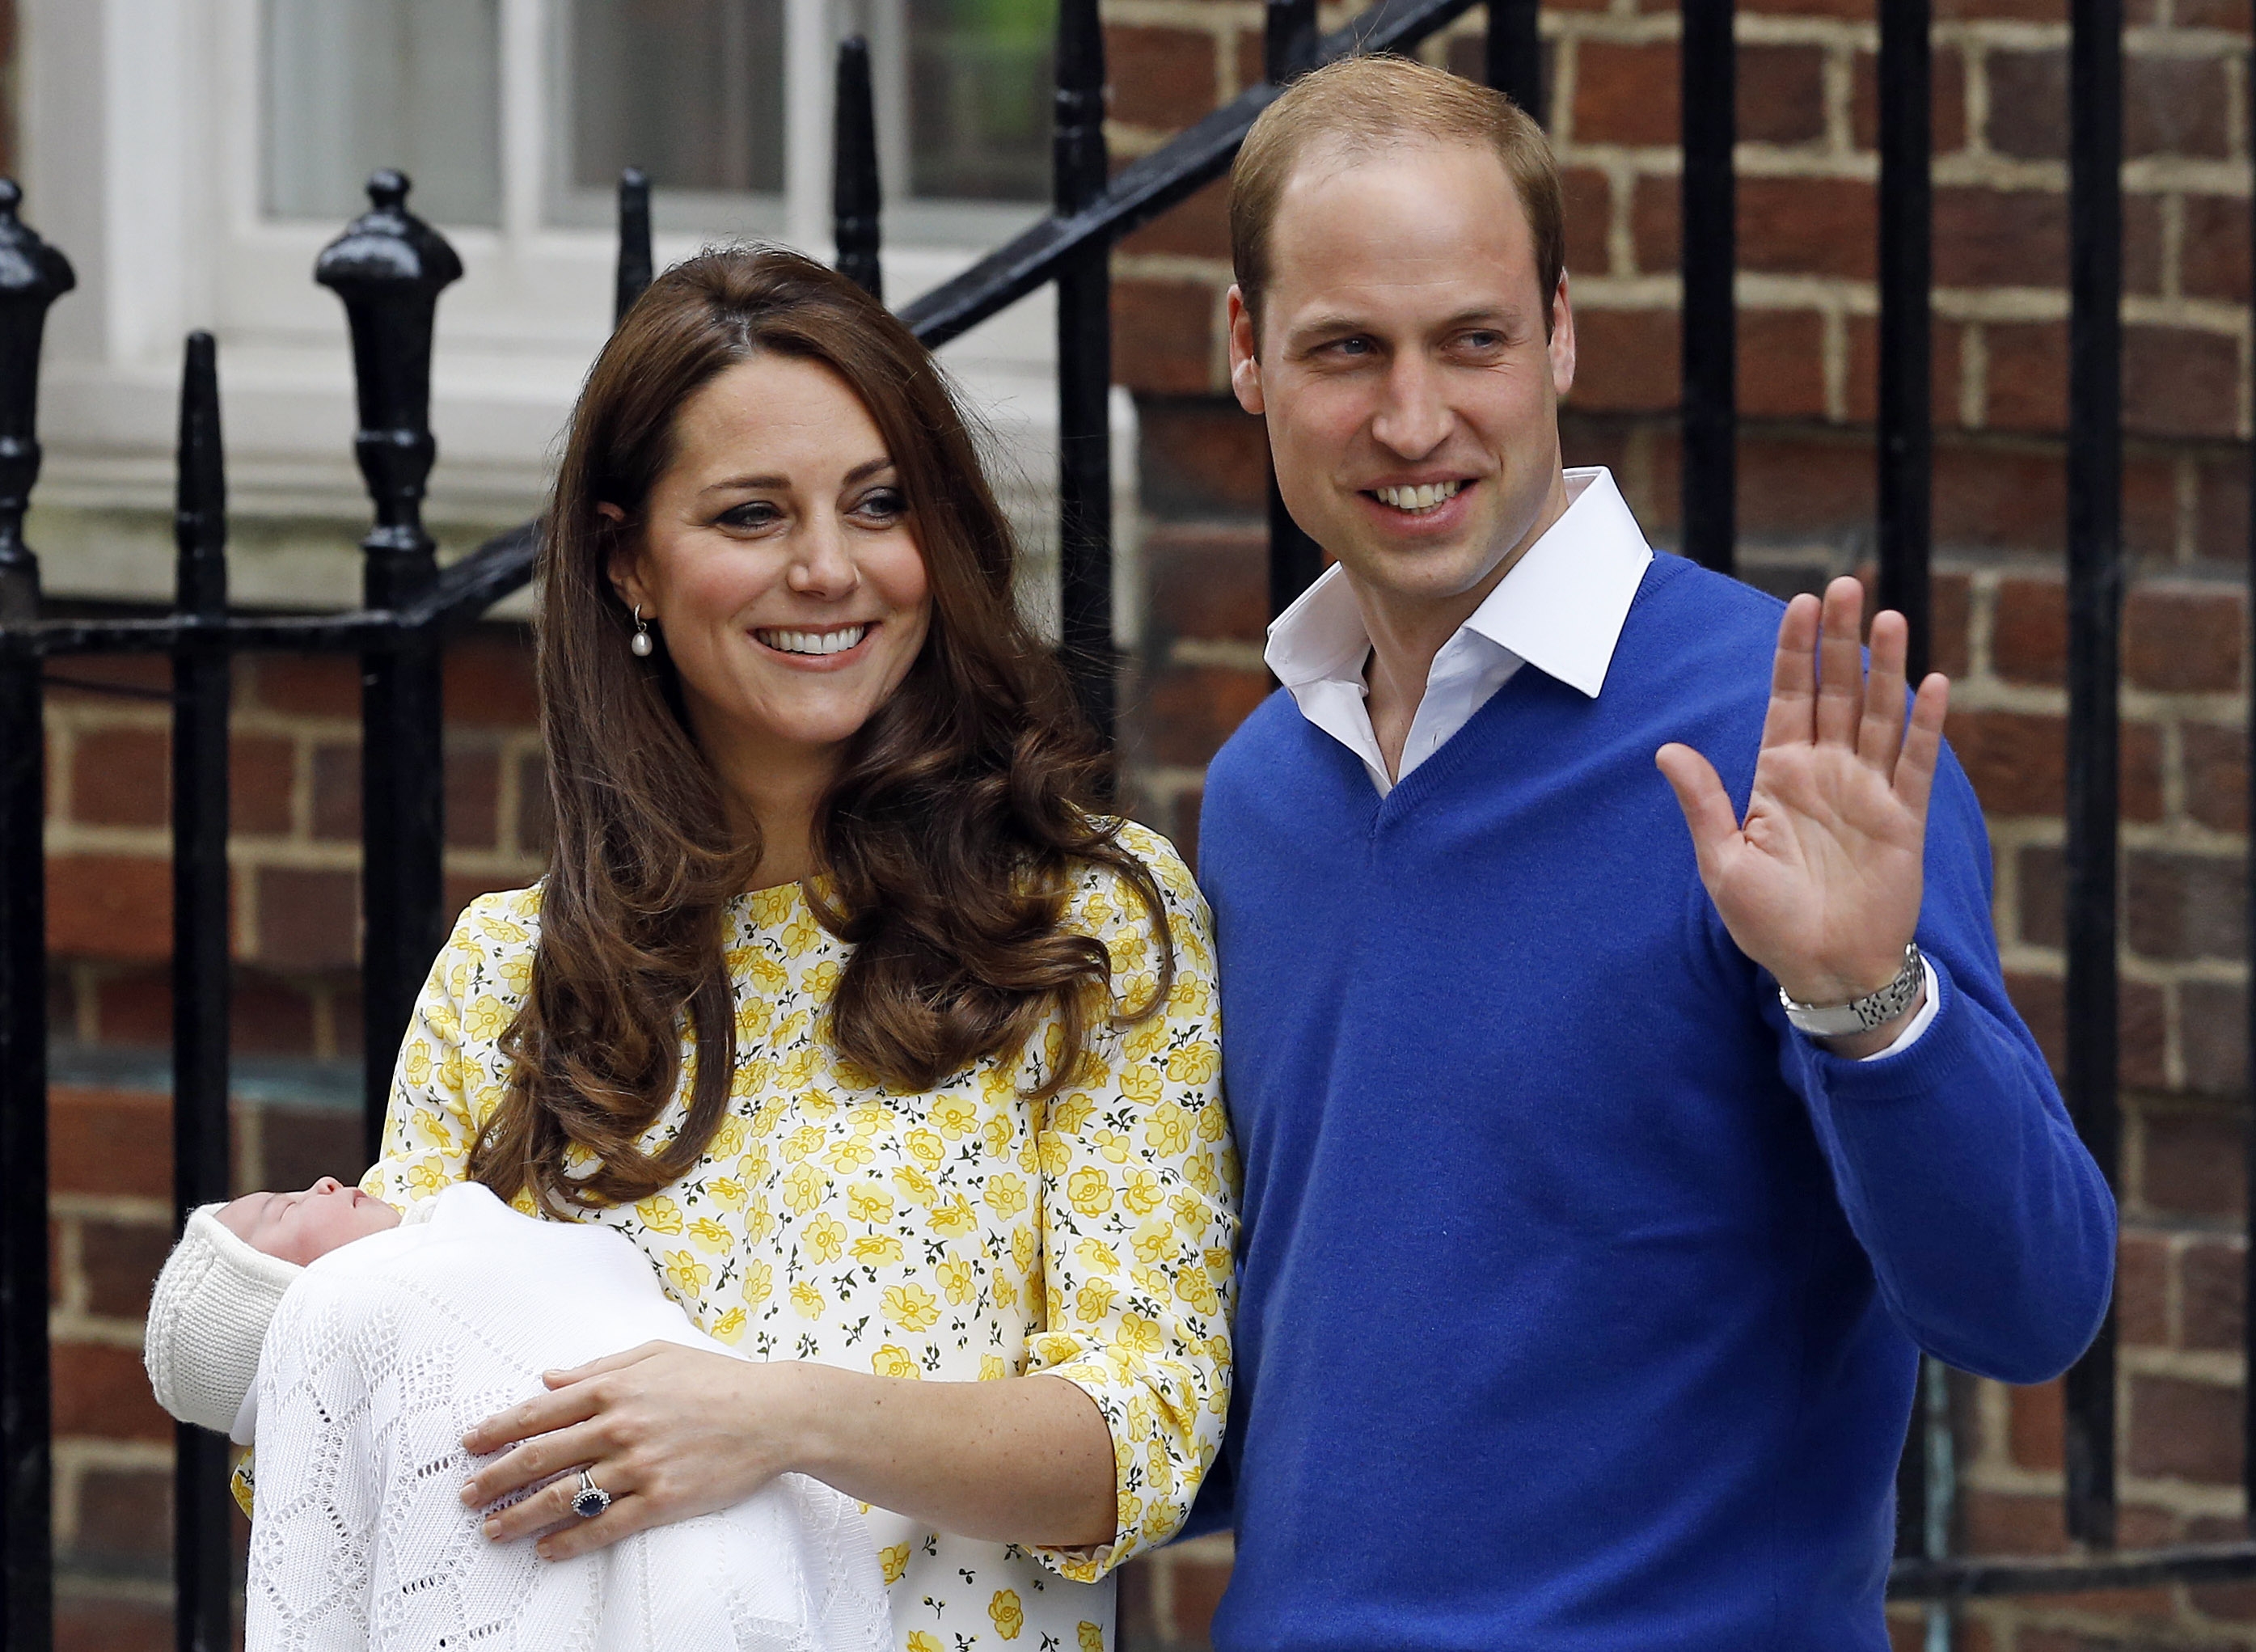 Britain's Prince William and Kate, Duchess of Cambridge and their newborn baby princess, pose for the media as they leave St. Mary's Hospital's exclusive Lindo Wing, London, Saturday, May 2, 2015.  Kate, the Duchess of Cambridge, gave birth to a baby girl on Saturday morning.   (AP Photo/Kirsty Wigglesworth)